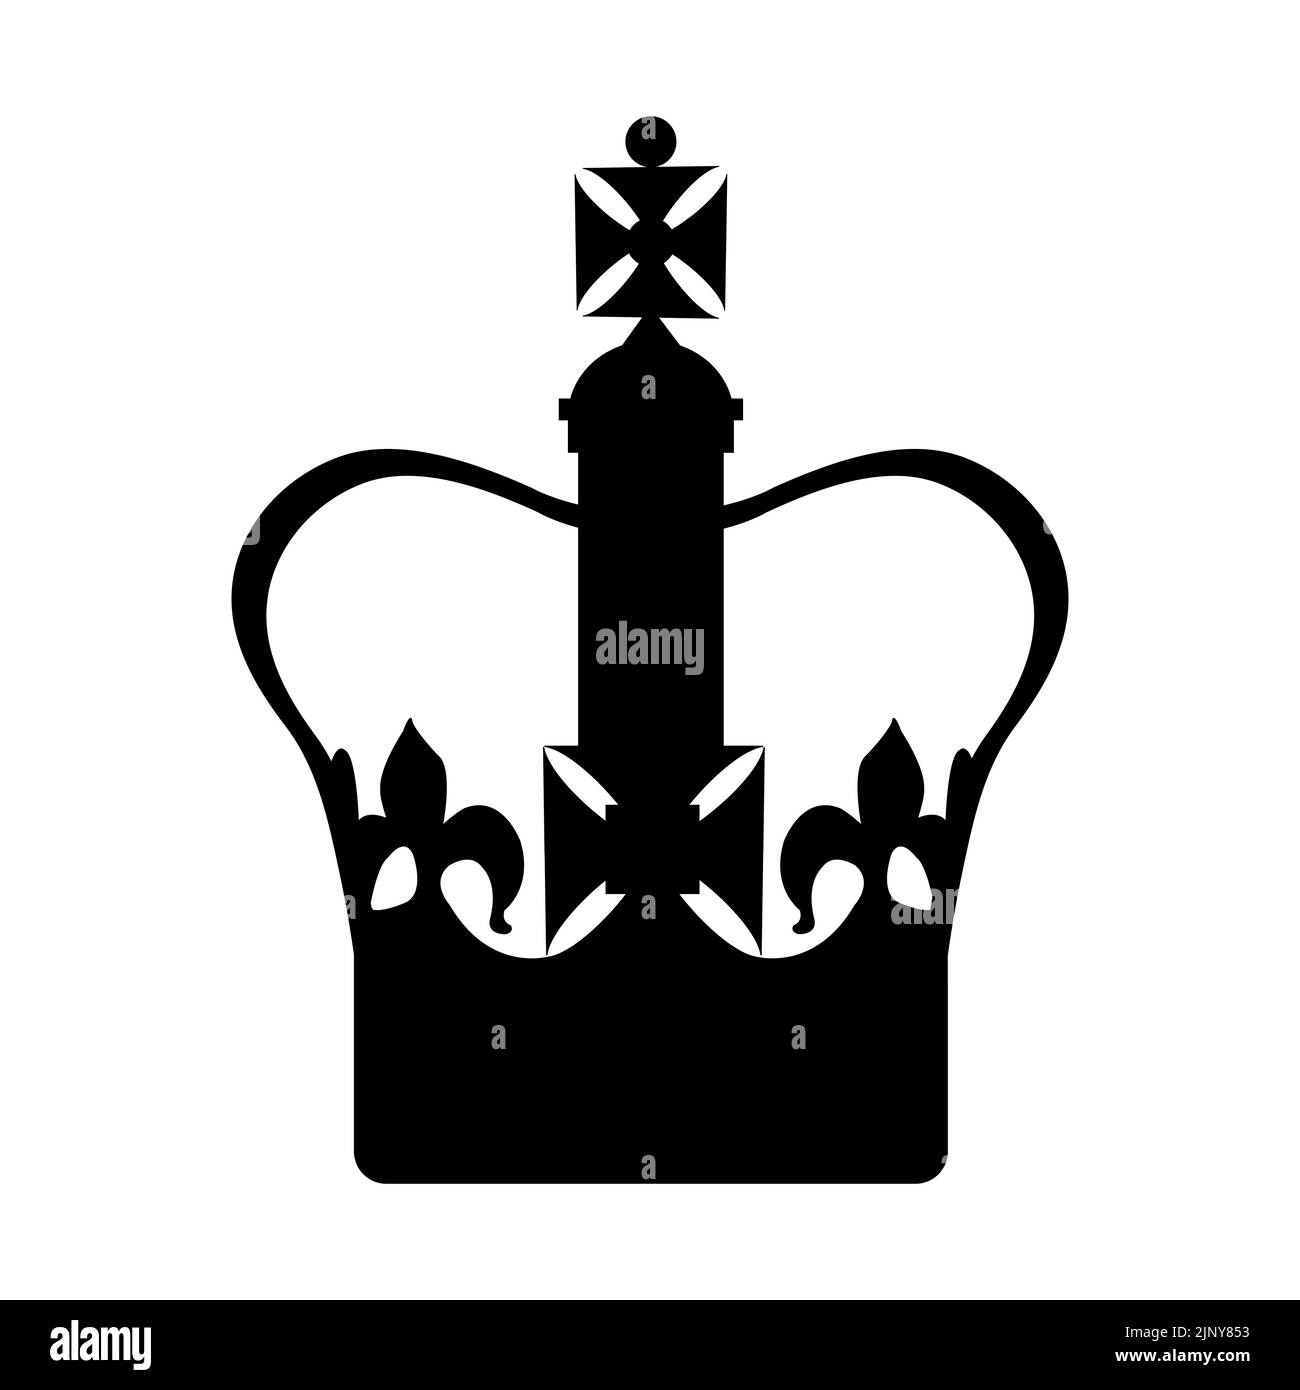 Black silhouette of Imperial state crown of the UK. Vector illustration of Crown Jewels of the United Kingdom, symbol of the monarchy Stock Vector